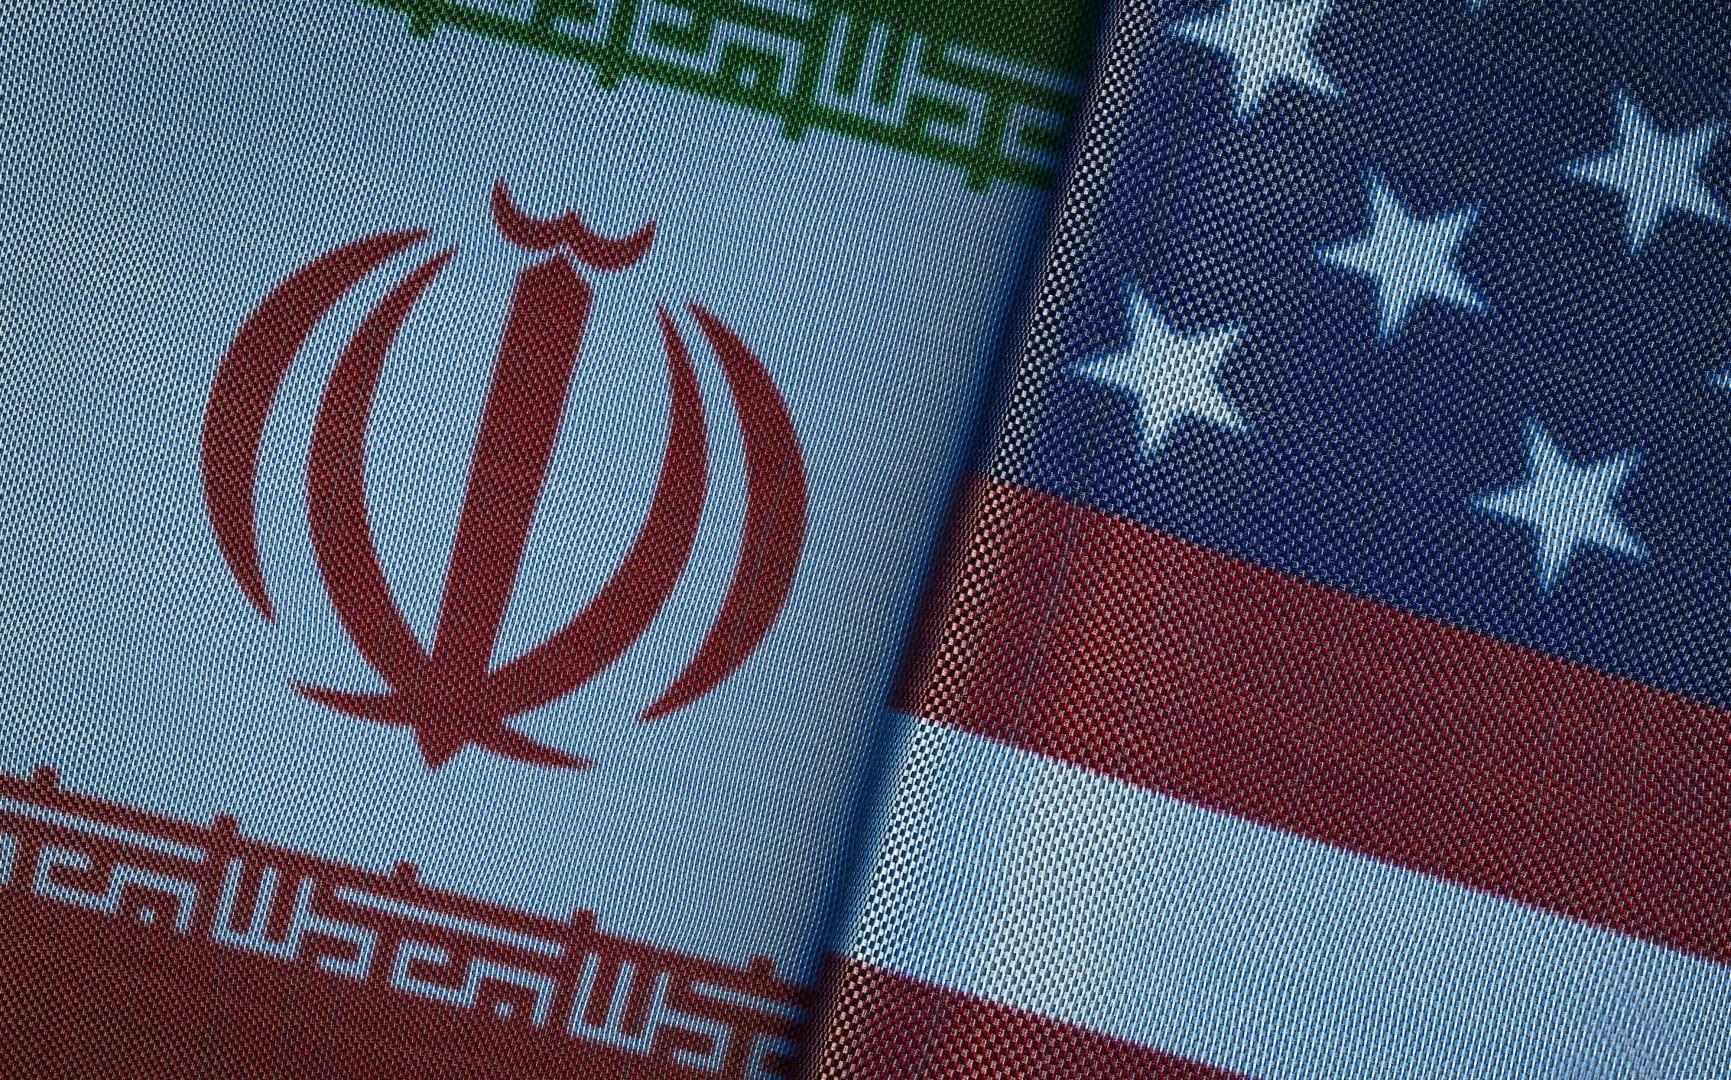 Biden protects Iran after it tries to assassinate US official